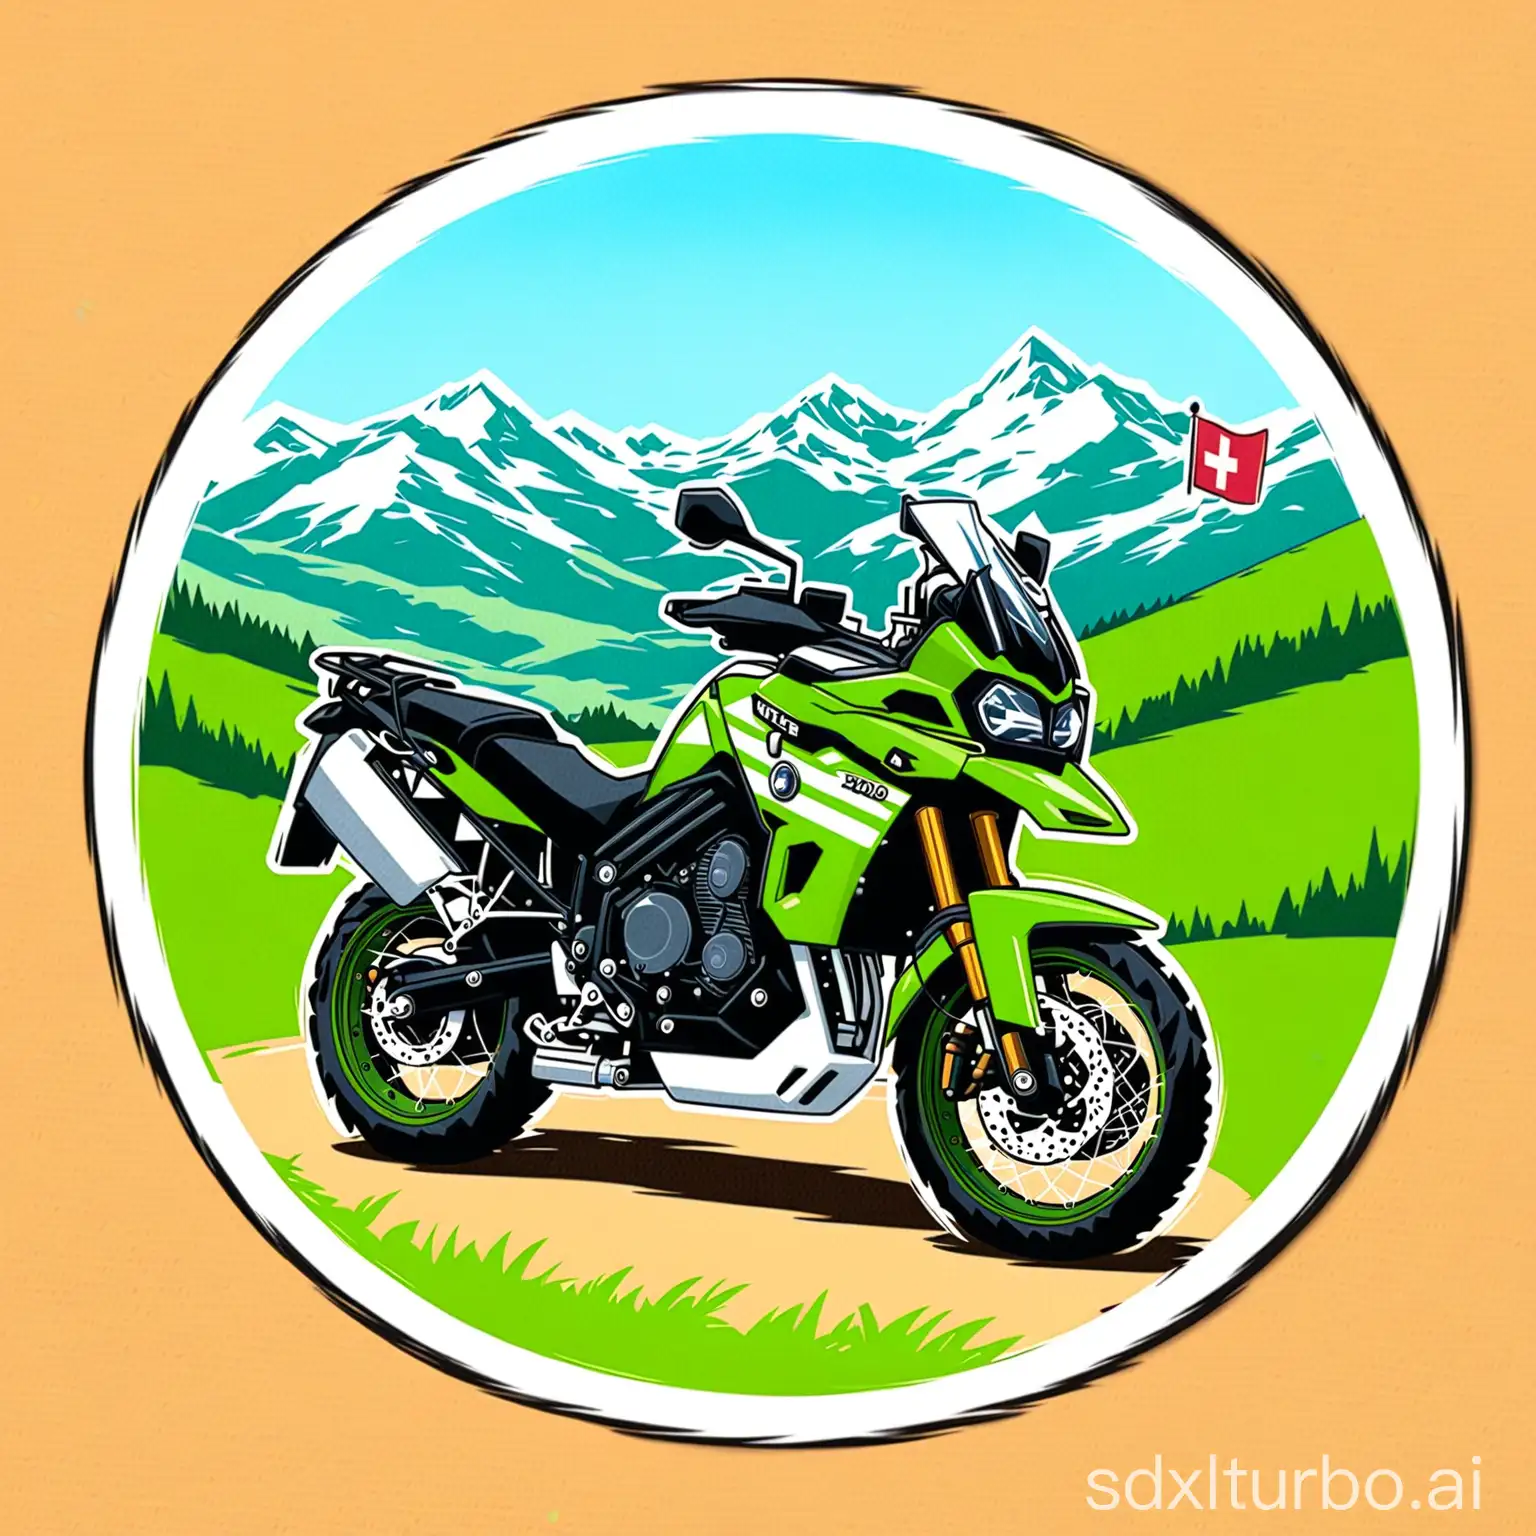 Swiss-Flag-Mountain-Landscape-with-Olive-Green-Triumph-Tiger-900-Rally-Pro-Motorcycle-Sticker